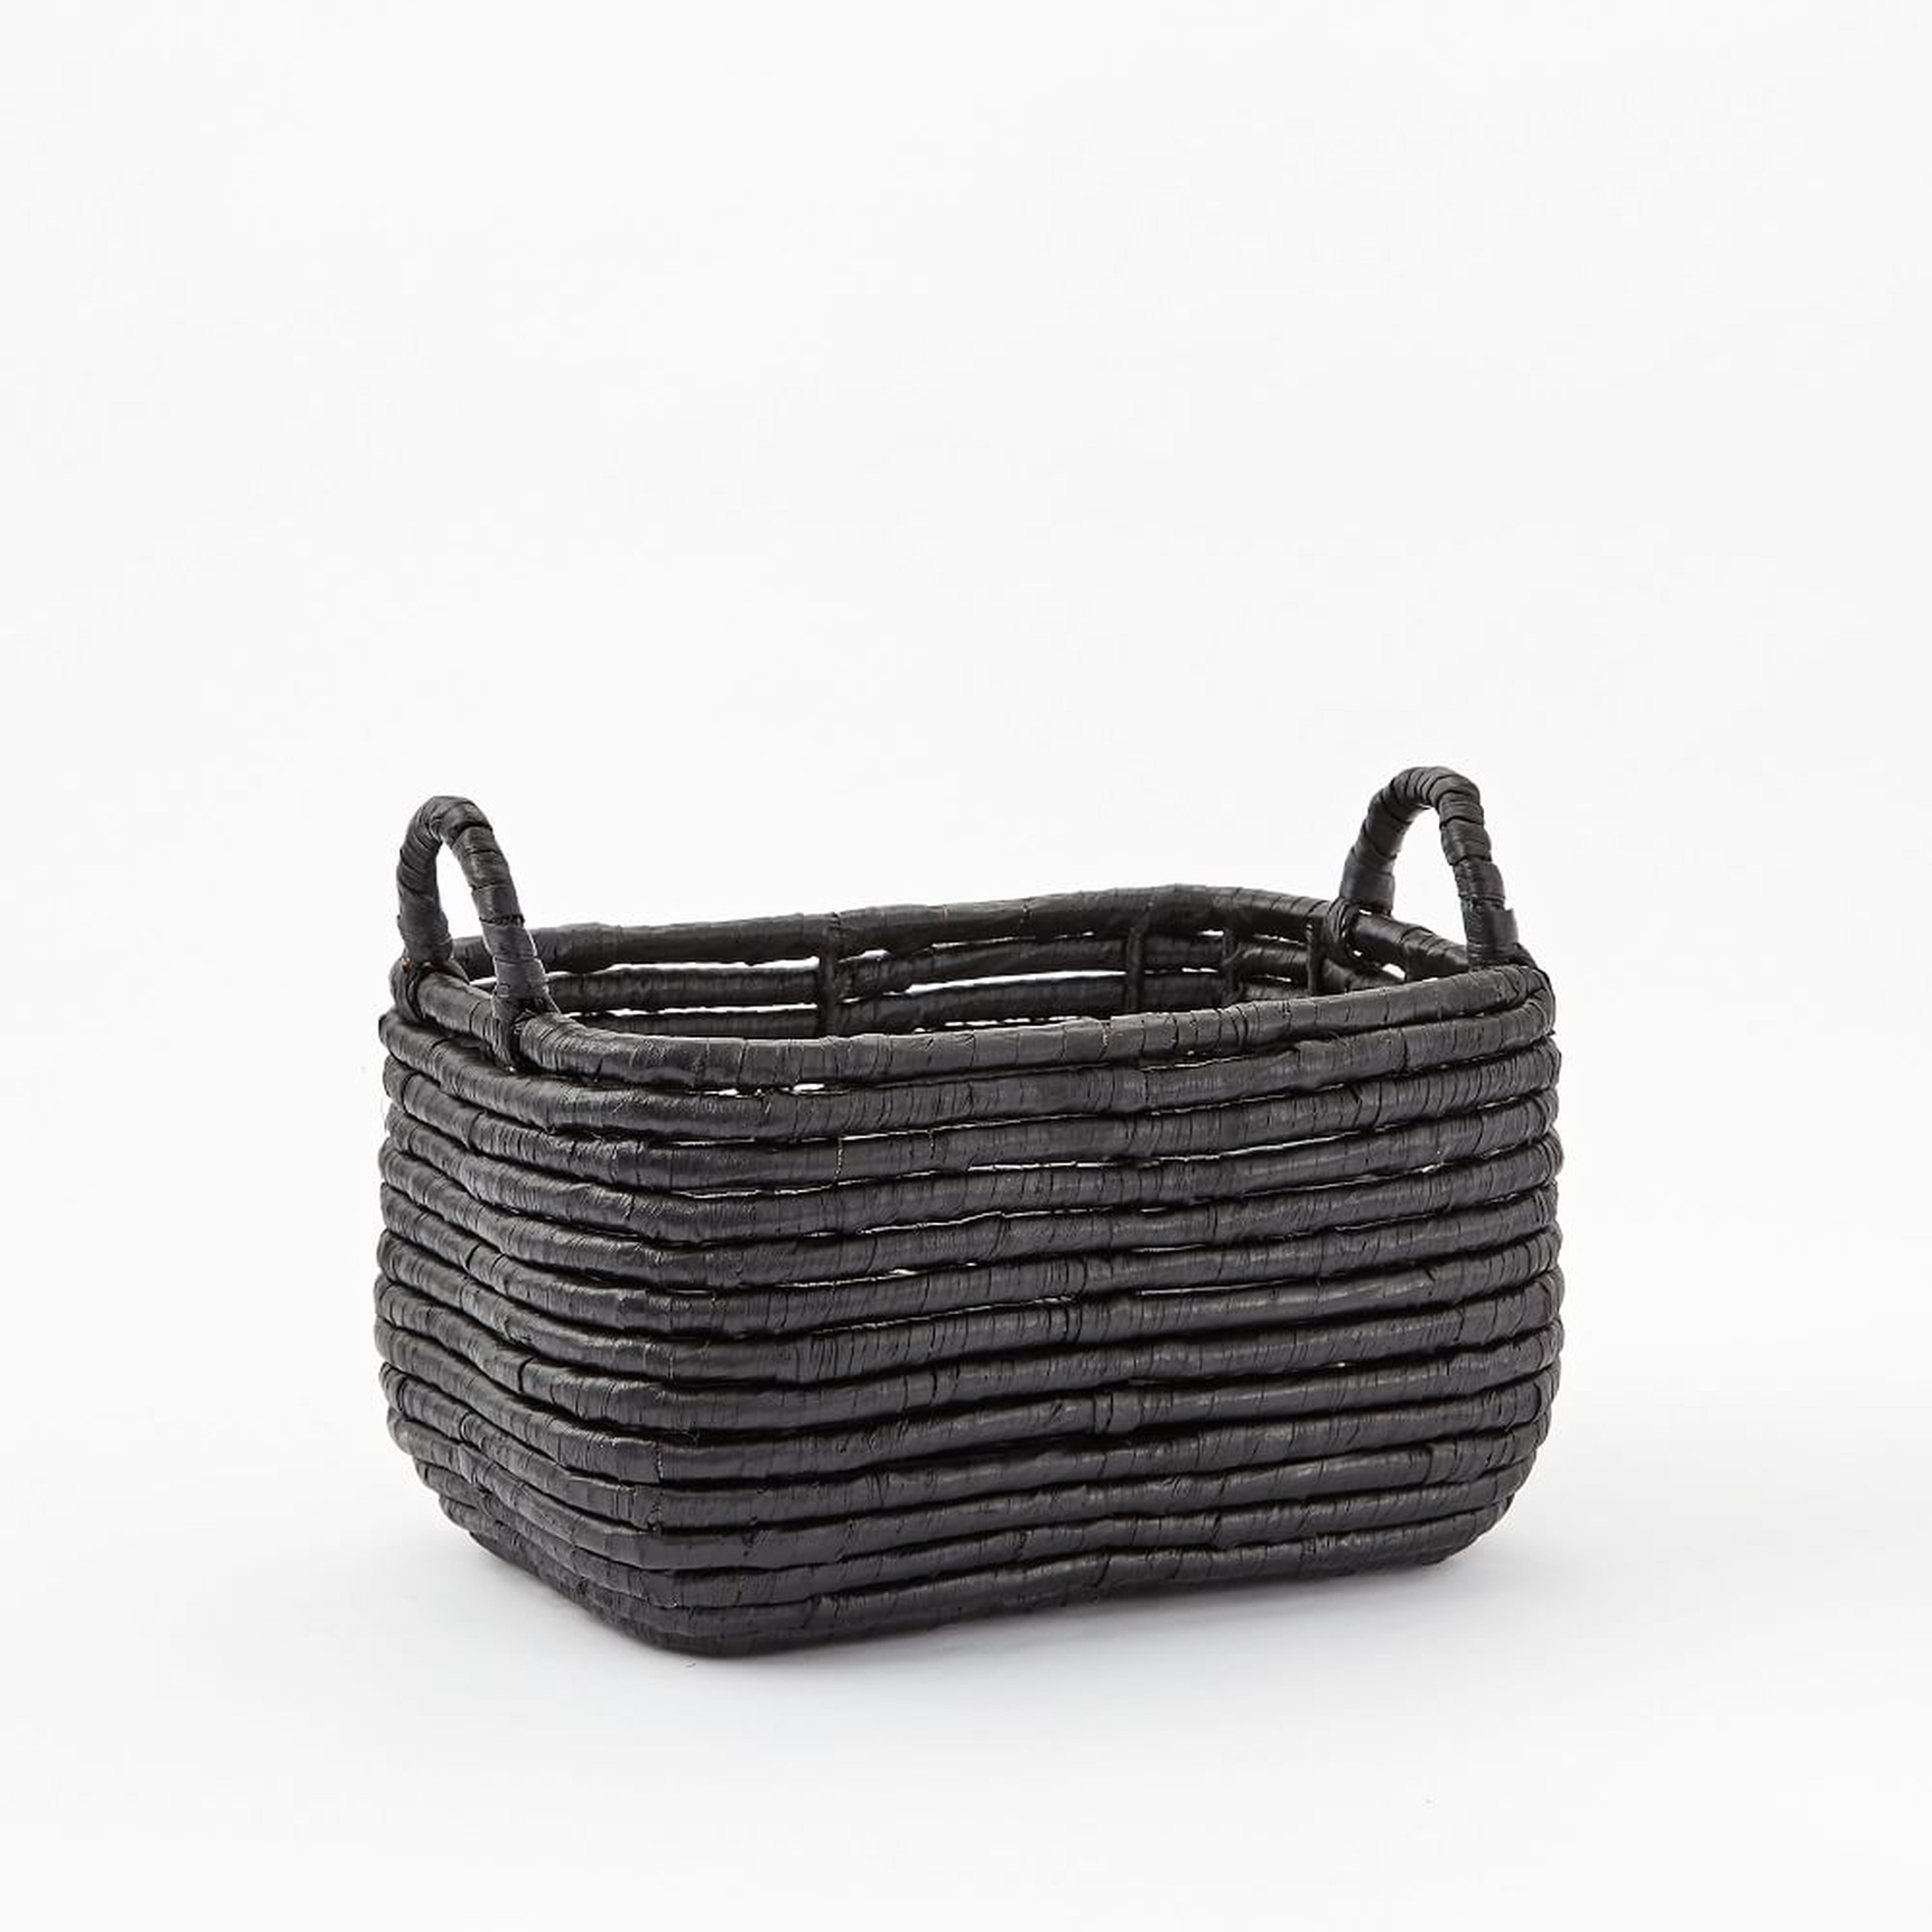 Woven Seagrass, Handle Baskets, Black, Small, 14.5"W x 10.5"D x 8.5"H - West Elm